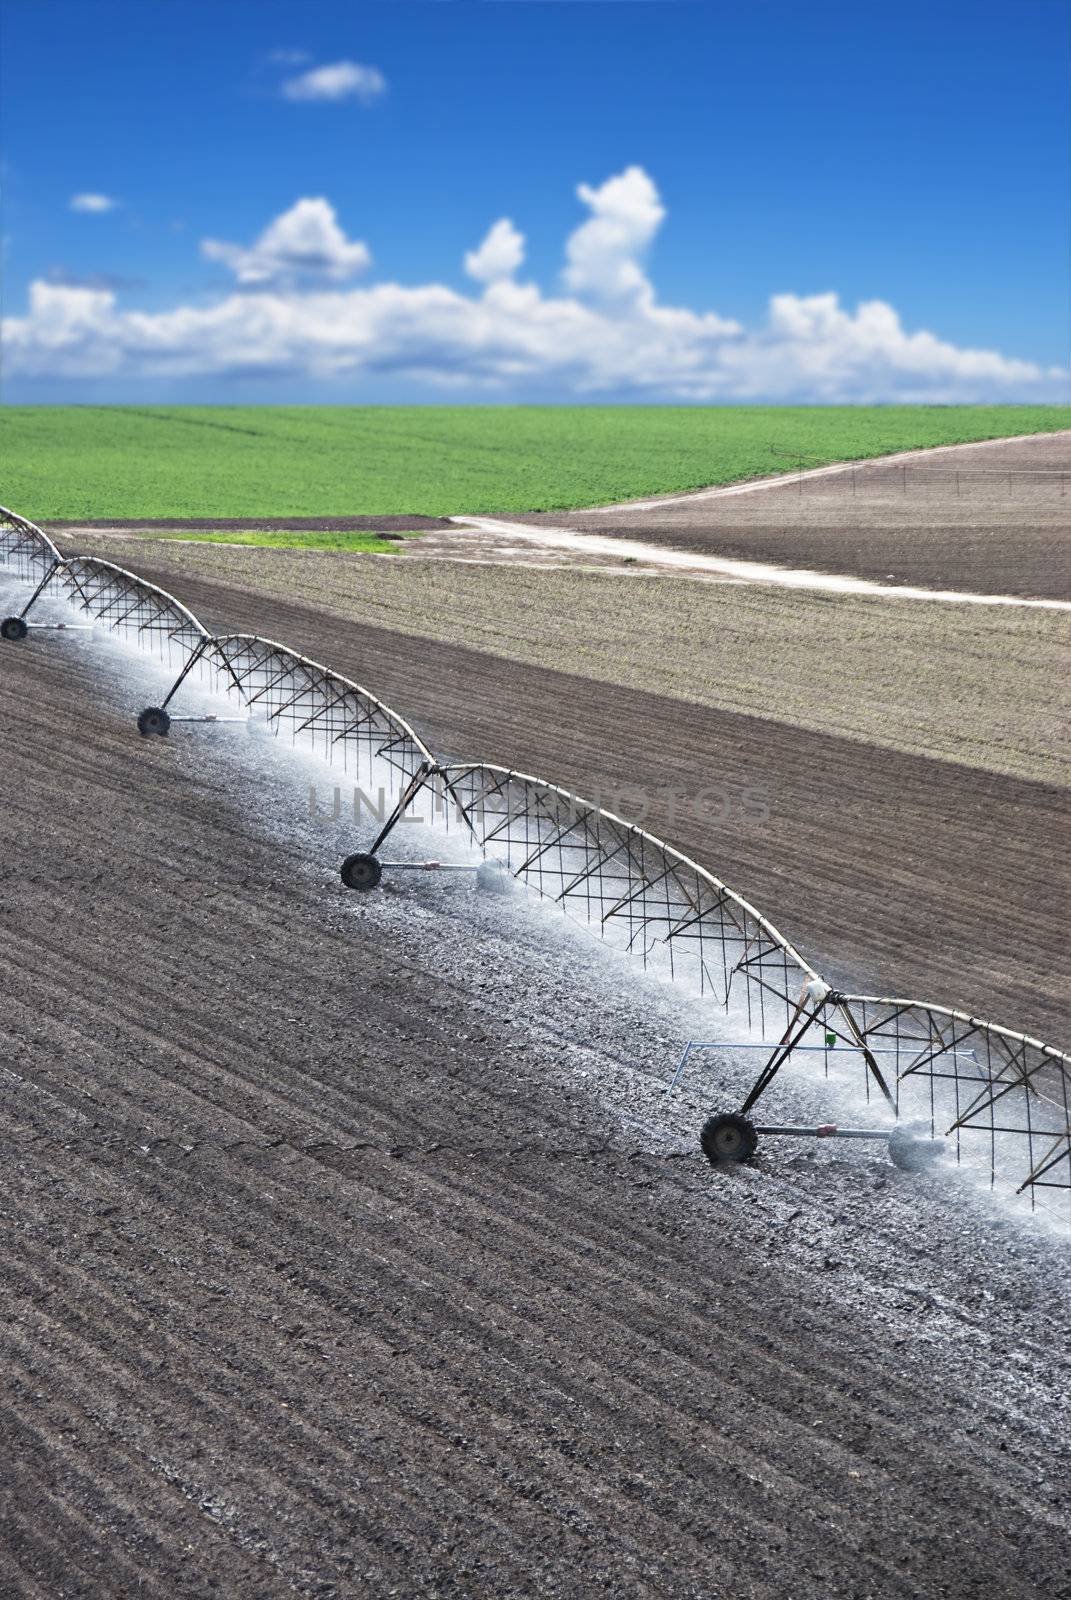 Farm field with modern irrigation system water a newly planted field